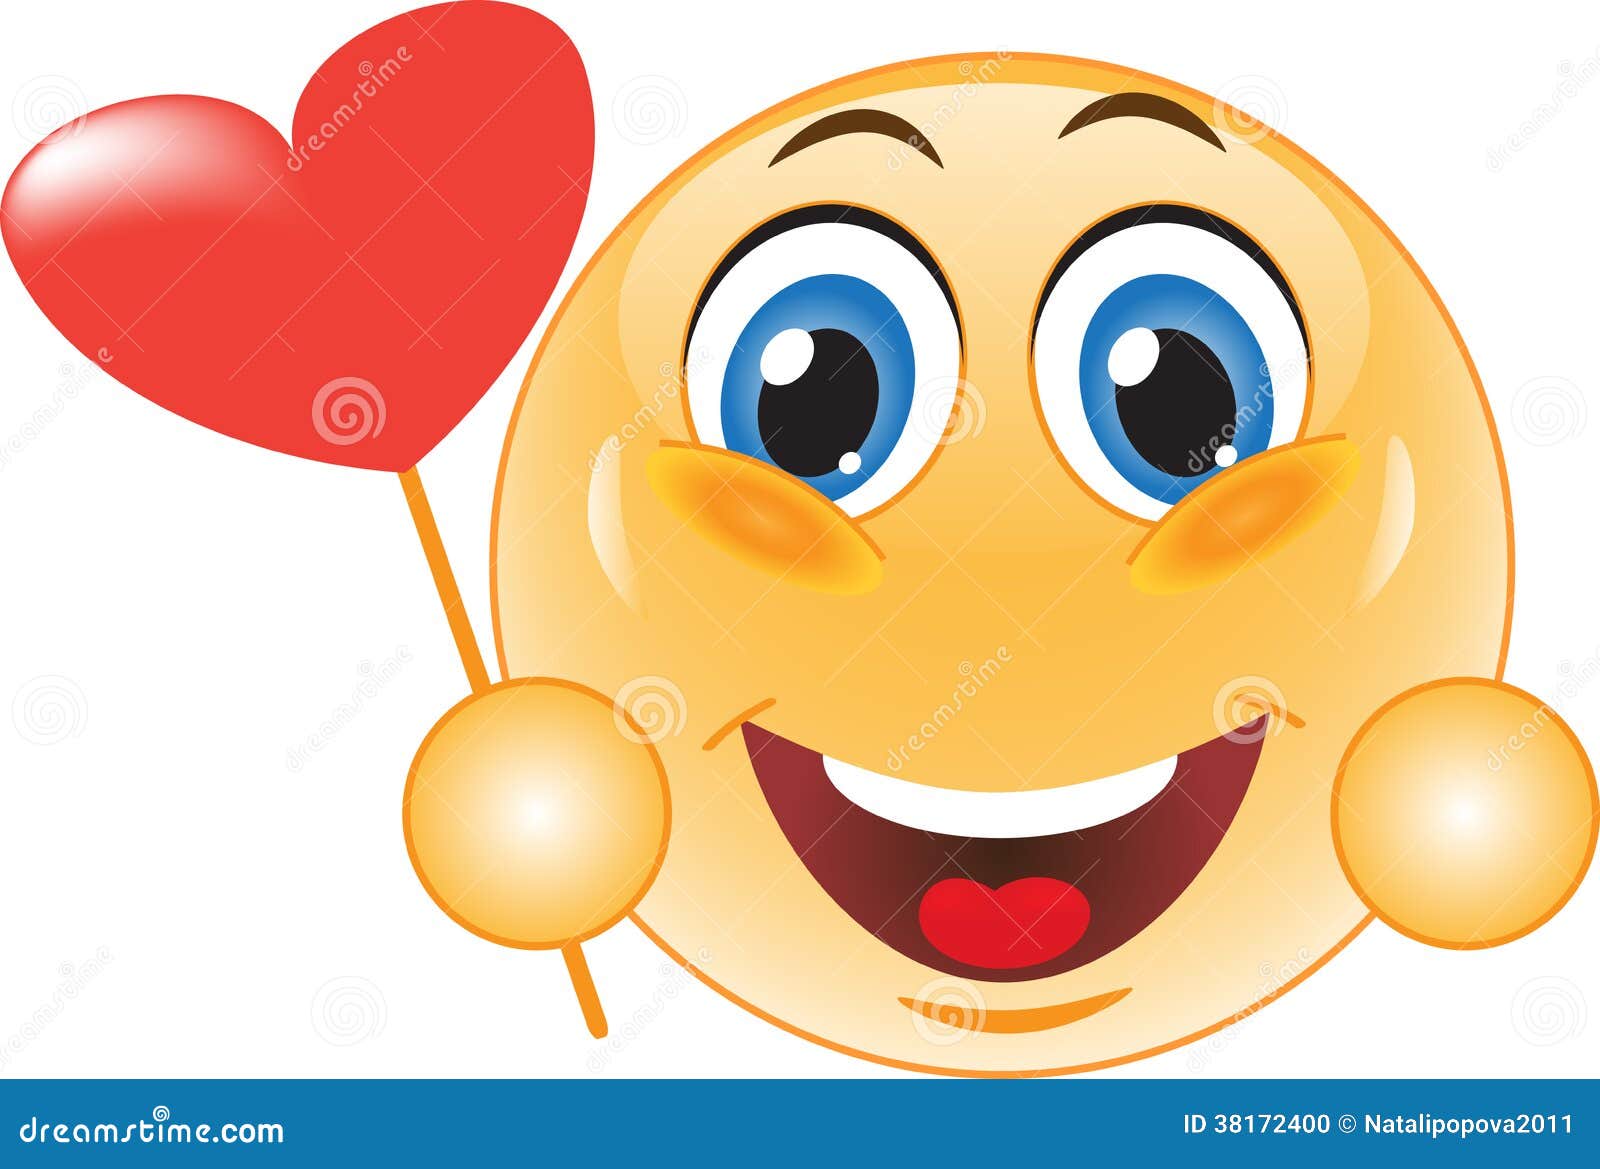 Smiley in Love stock vector. Illustration of icon, banner - 38172400